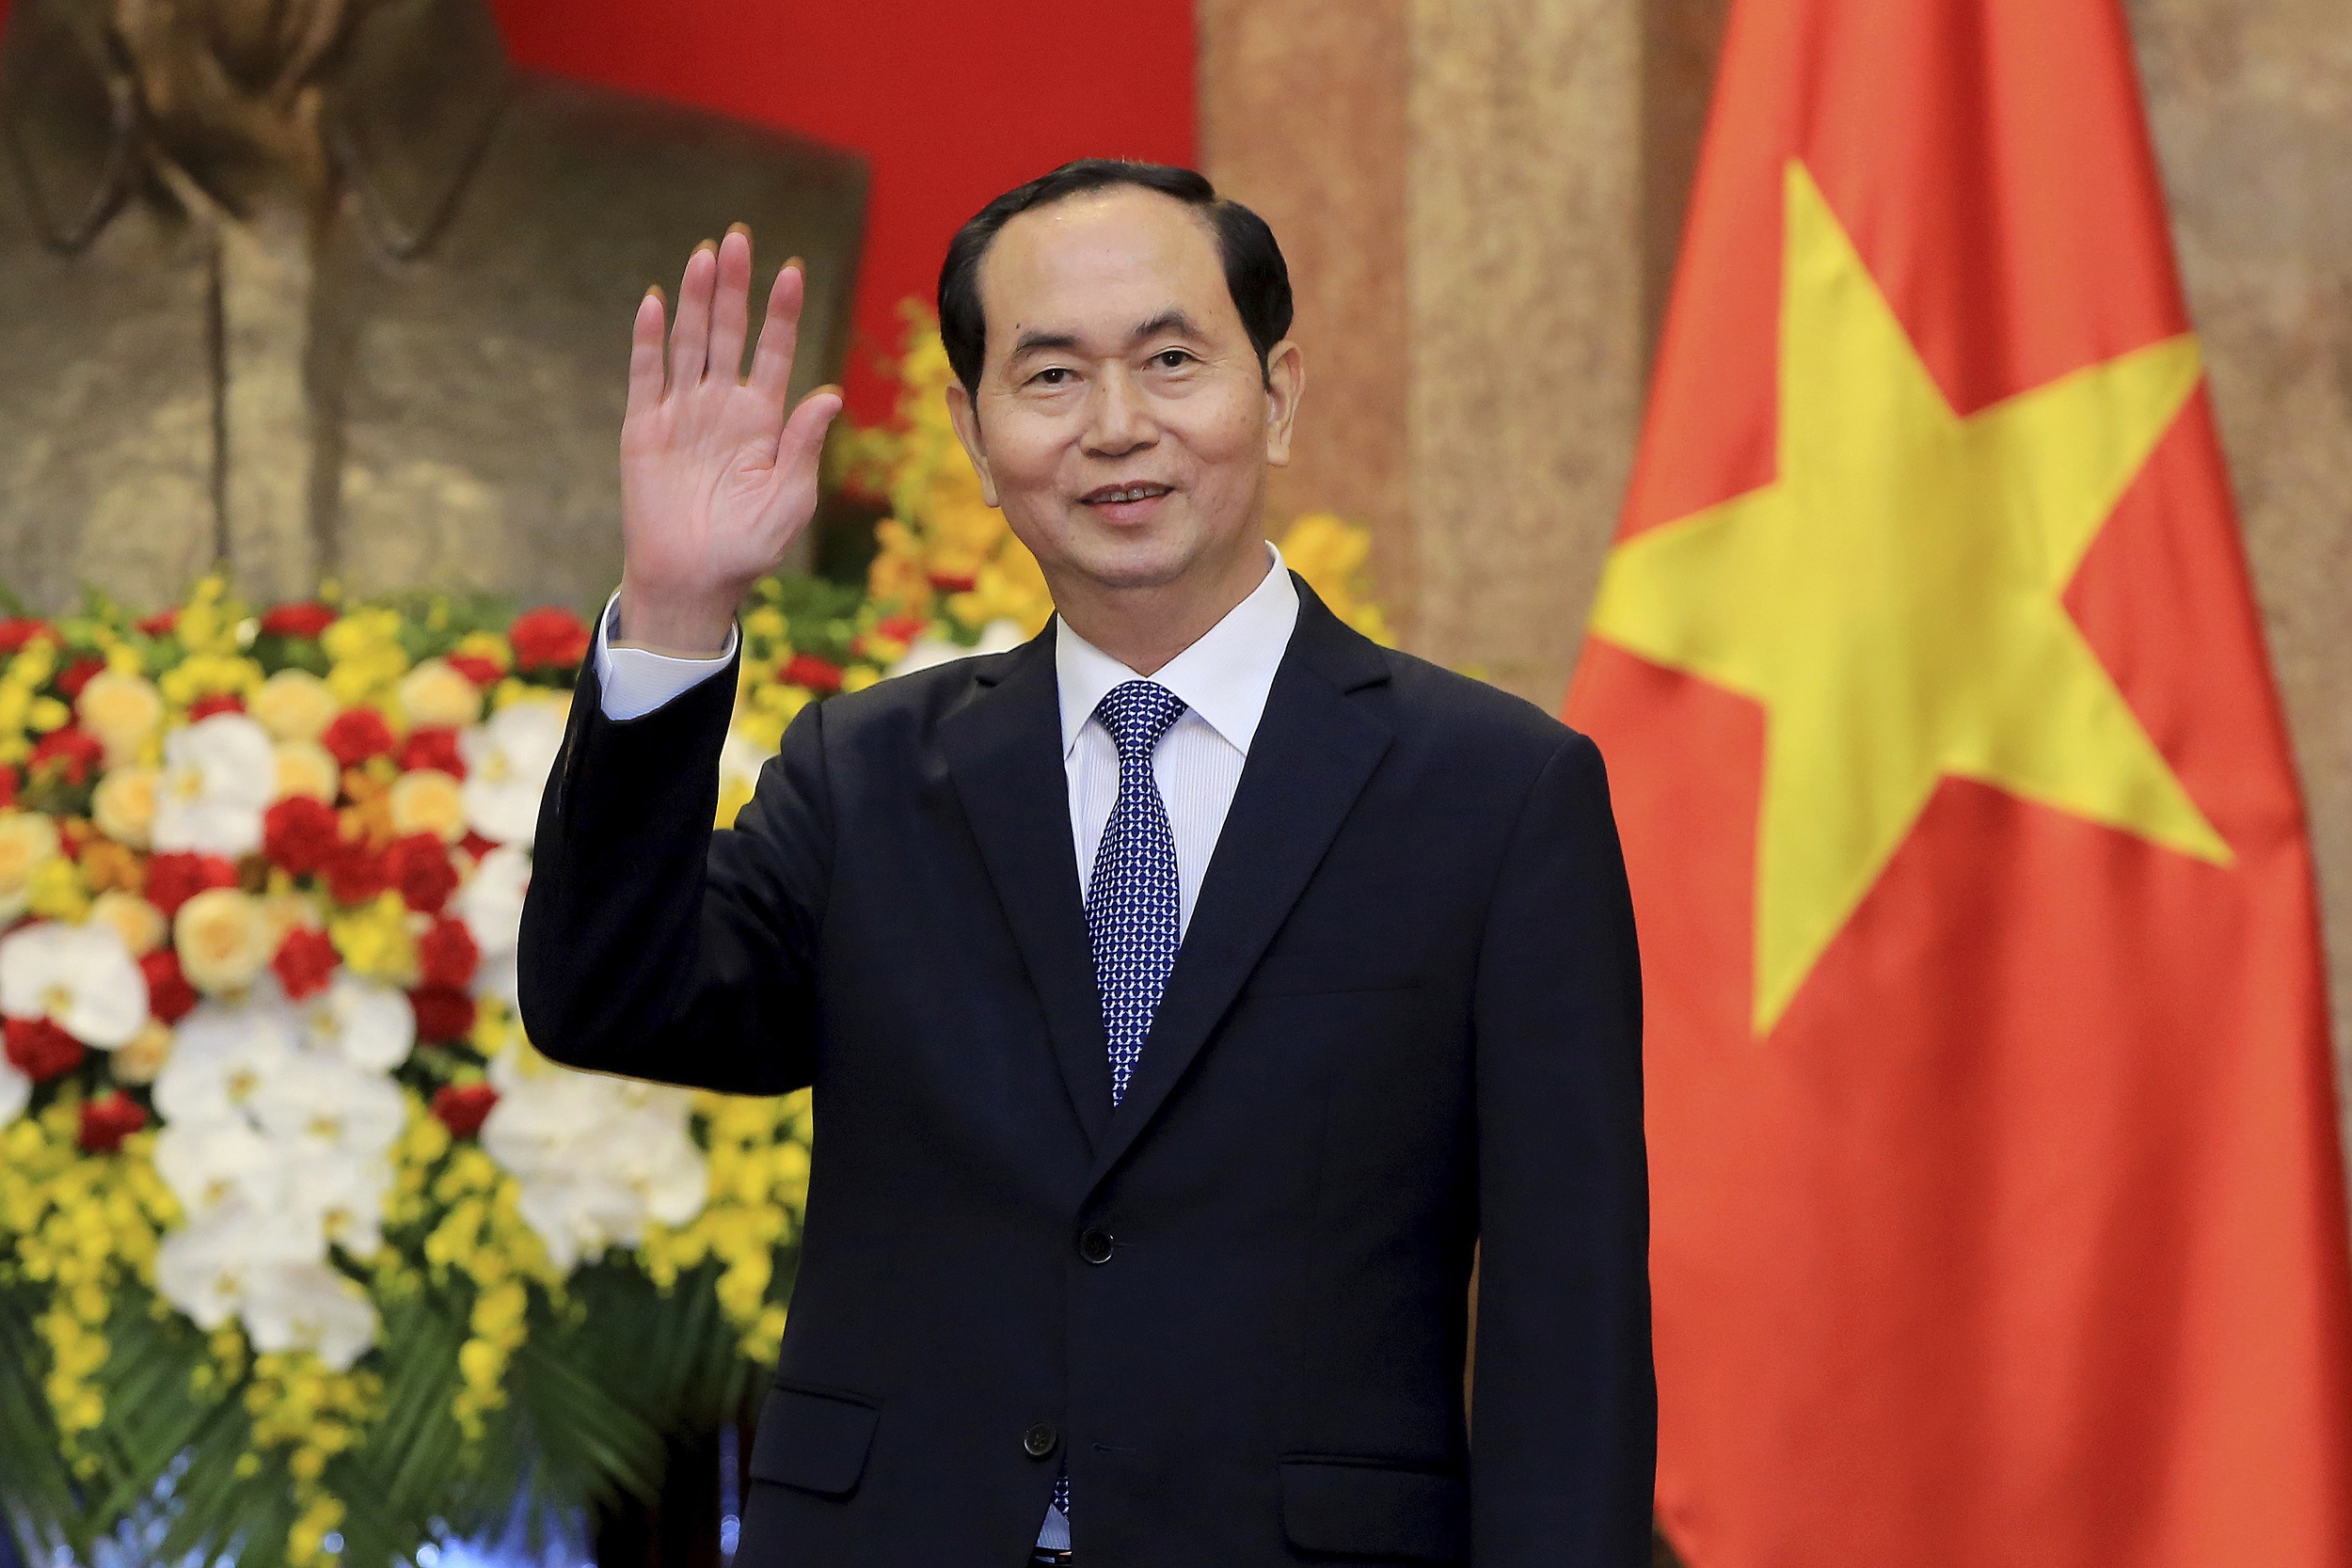 Vietnamese President Tran Dai Quang greets journalists as he waits for arrival of Russian Foreign Minister Sergei Lavrov at the Presidential Palace in Hanoi, Vietnam, March 23, 2018. Lavrov is on an official visit to Vietnam to promote bilateral cooperation between the two nations. (AP Photo/Minh Hoang, Pool)